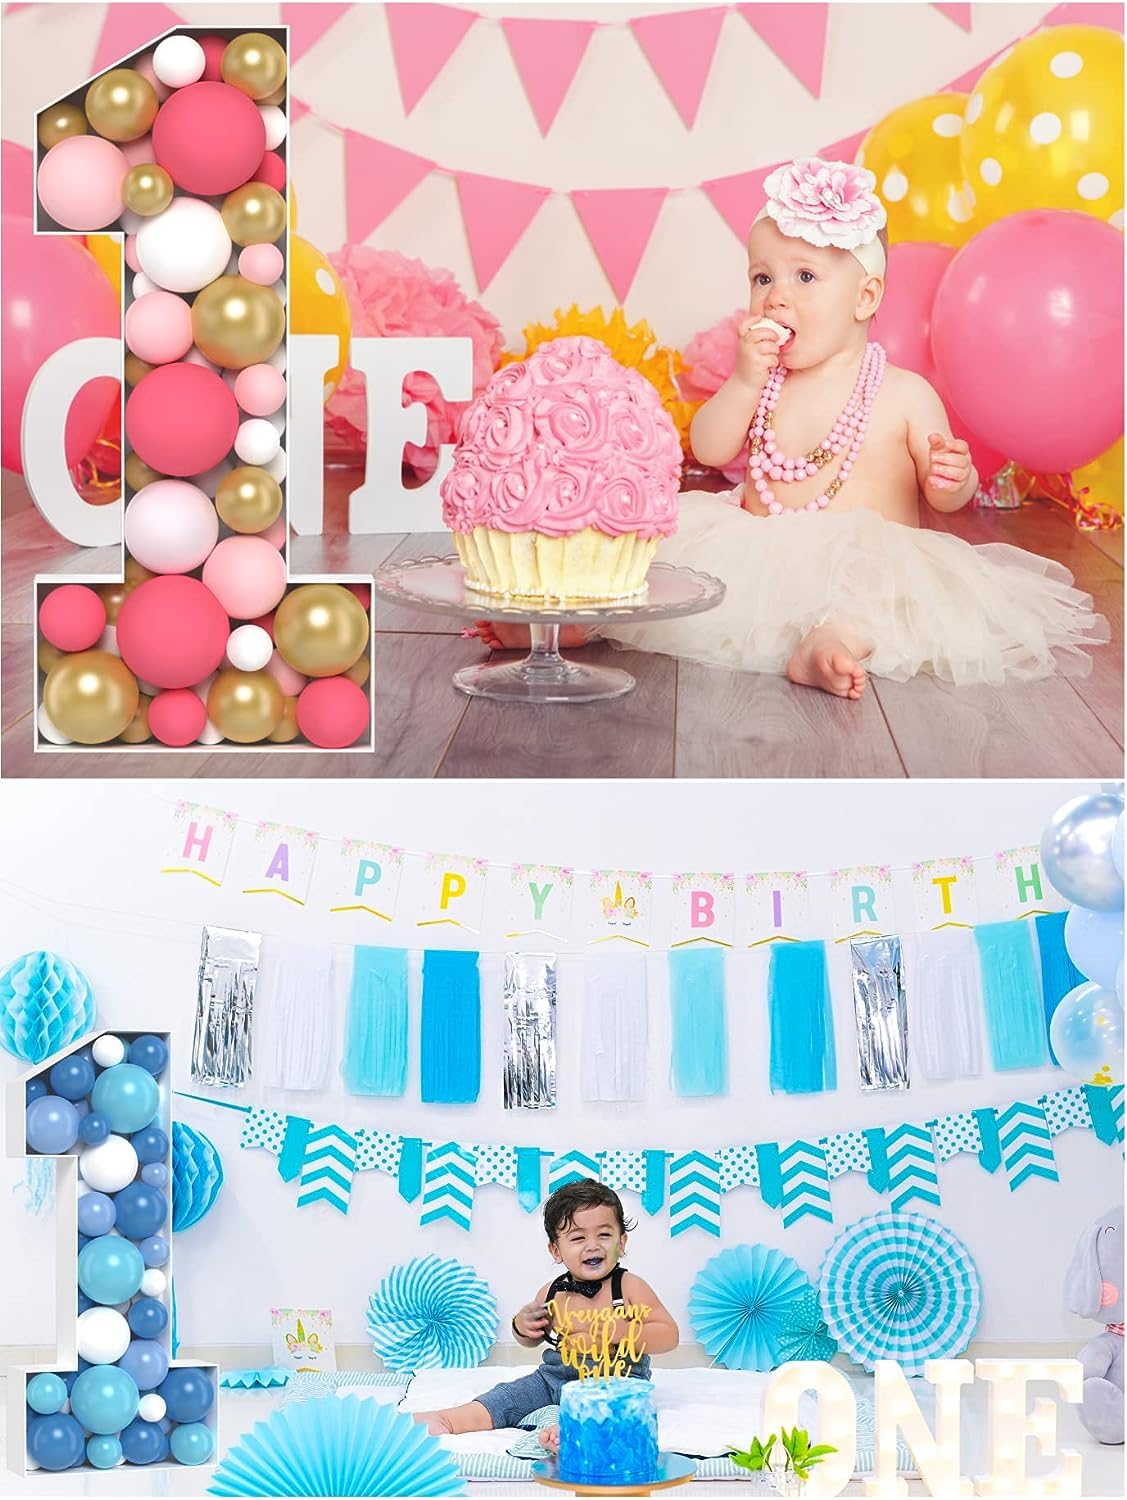 Super Easy Assembly 3FT Large Marquee Numbers - Number 1 Balloon Frame - Mosaic Numbers For Balloons - Ideal Number One Balloon Frame for First Birthday Decorations - Numero 1 Para Decoracion